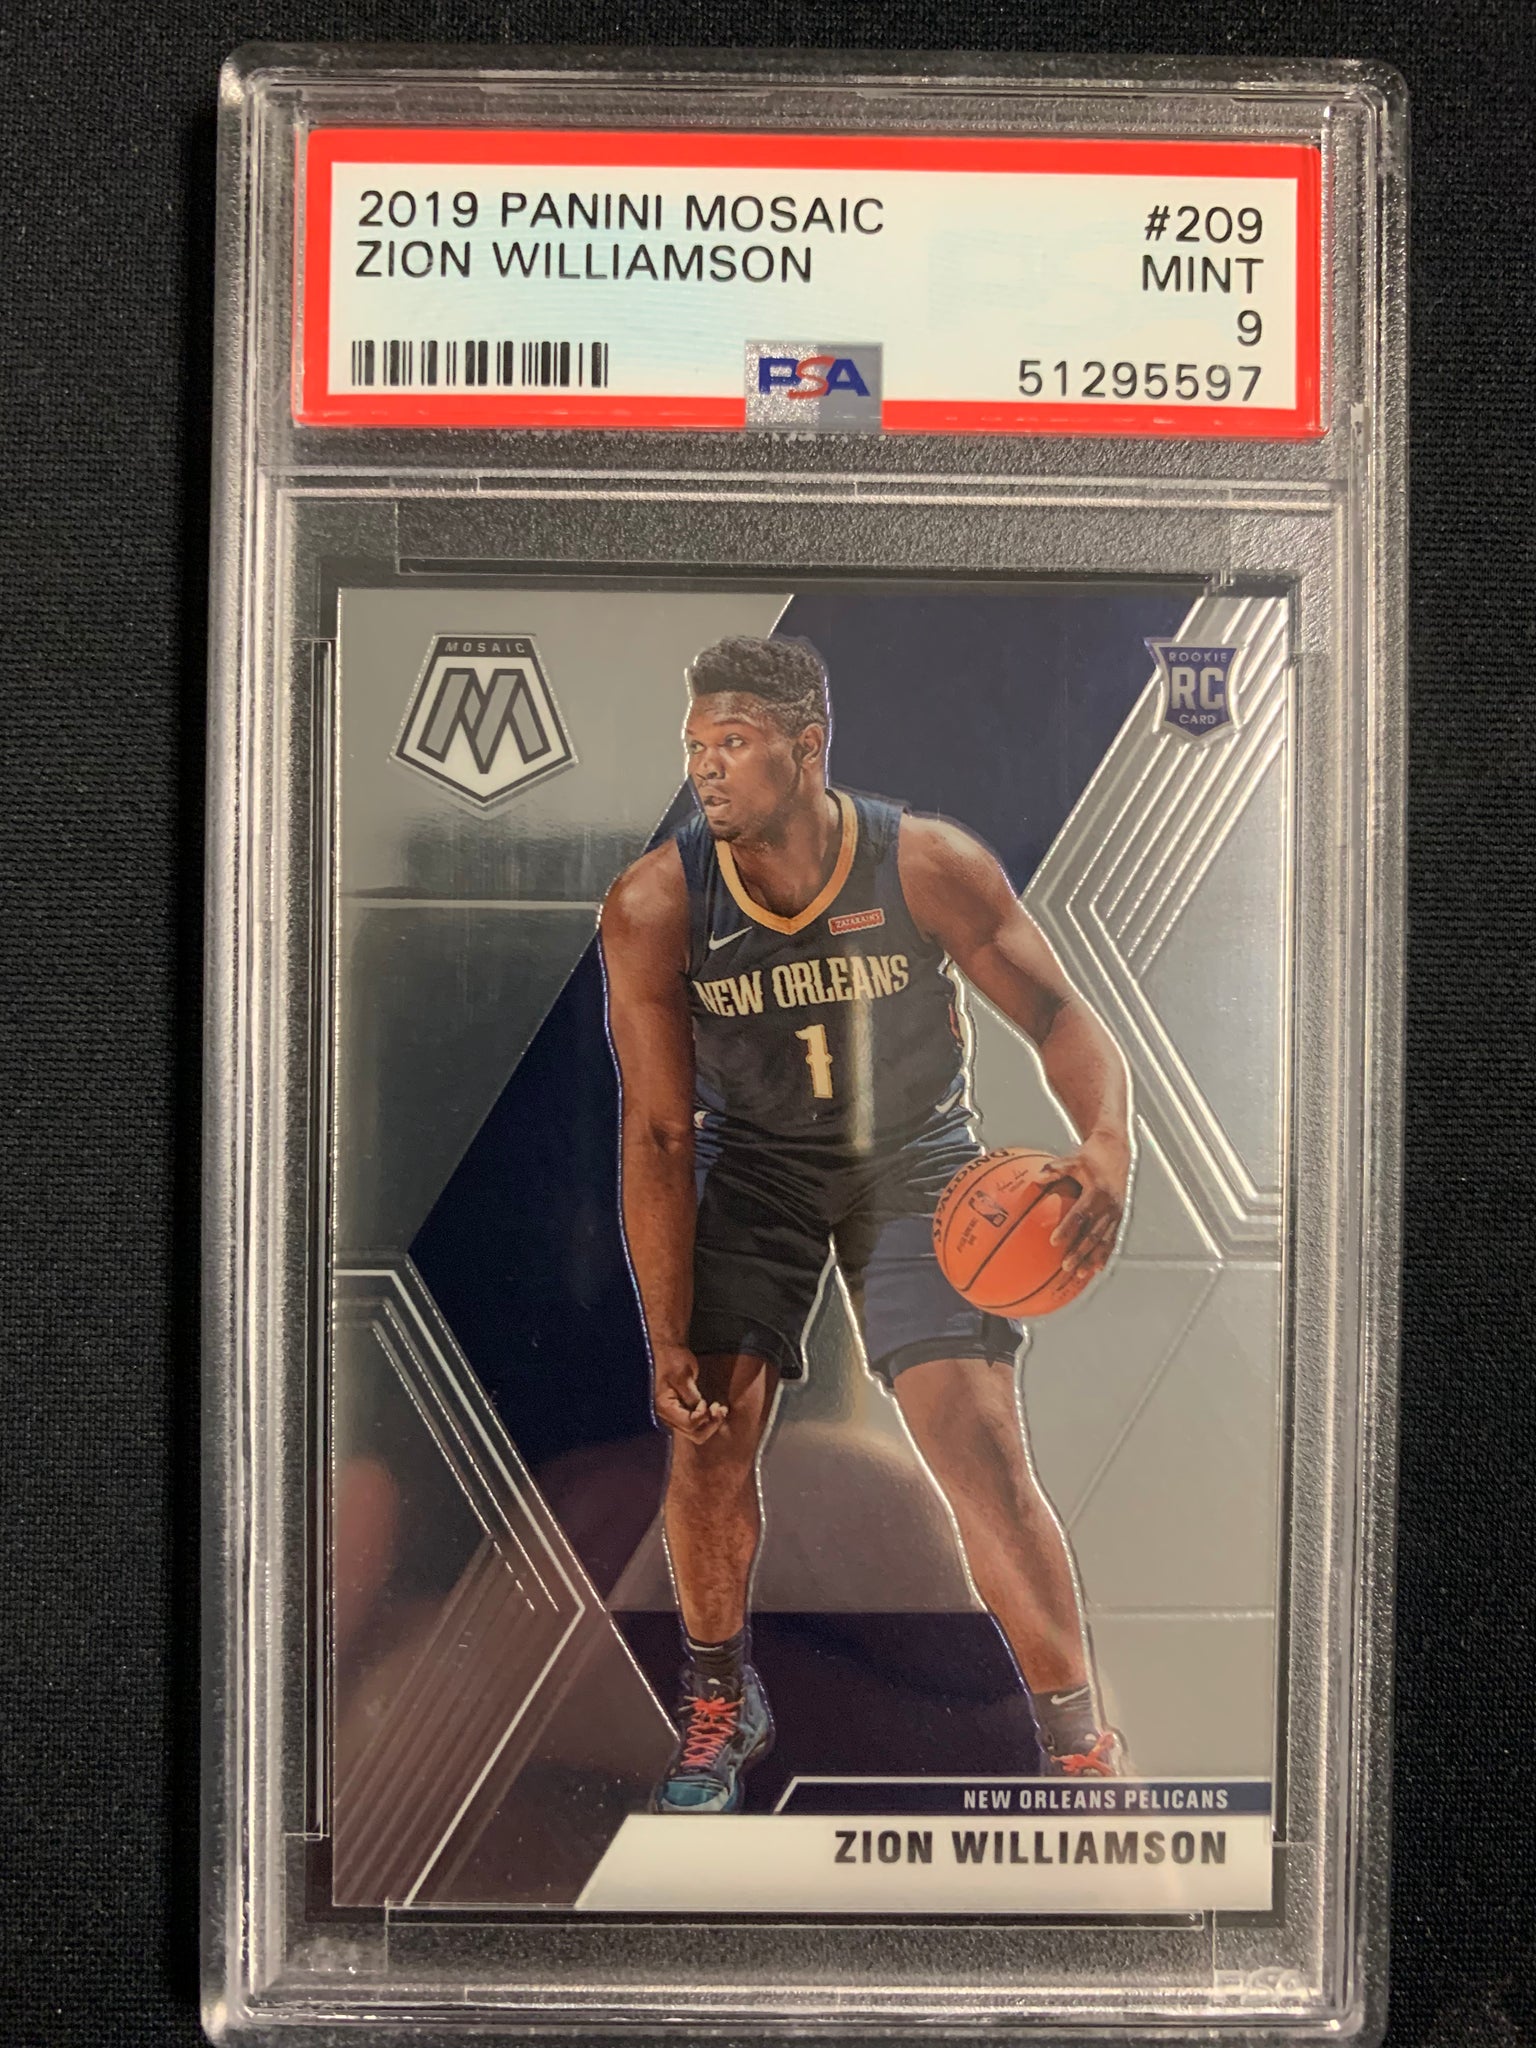 2019 PANINI MOSAIC NBA BASKETBALL #209 NEW ORLEANS PELICANS - ZION WILLIAMSON BASE ROOKIE CARD GRADED PSA 9 MINT